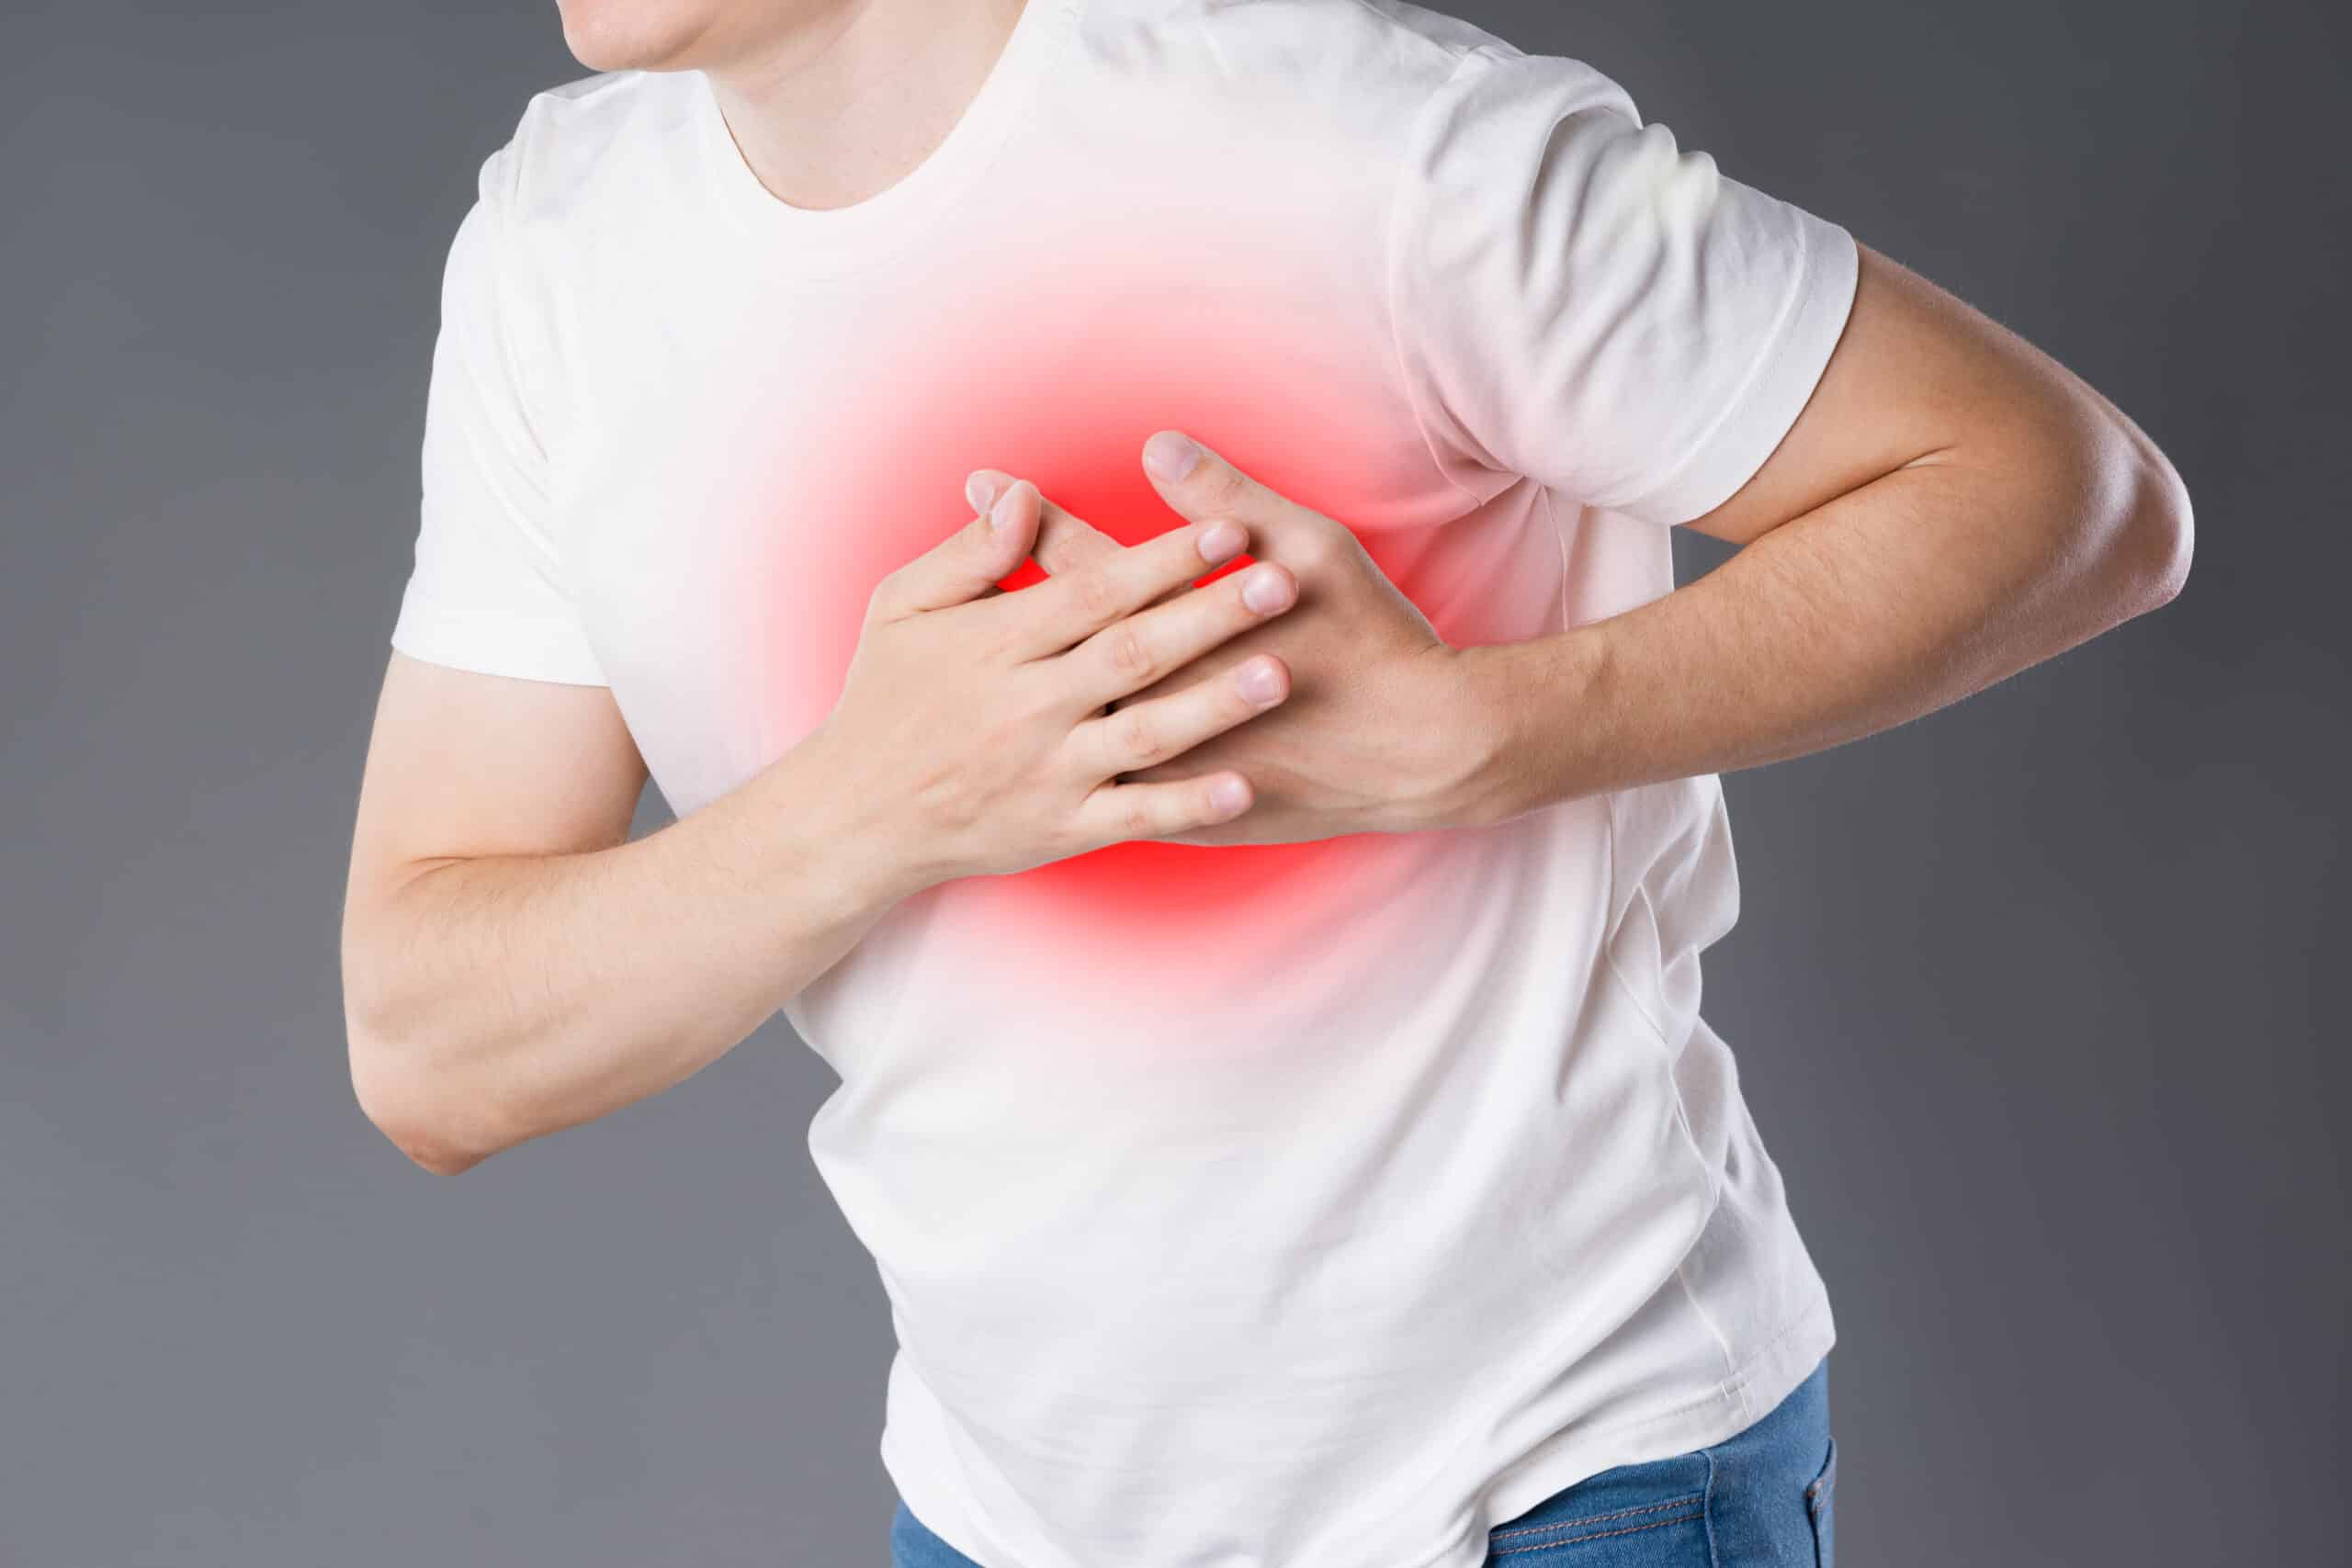 What is the difference between a stroke and a heart attack?